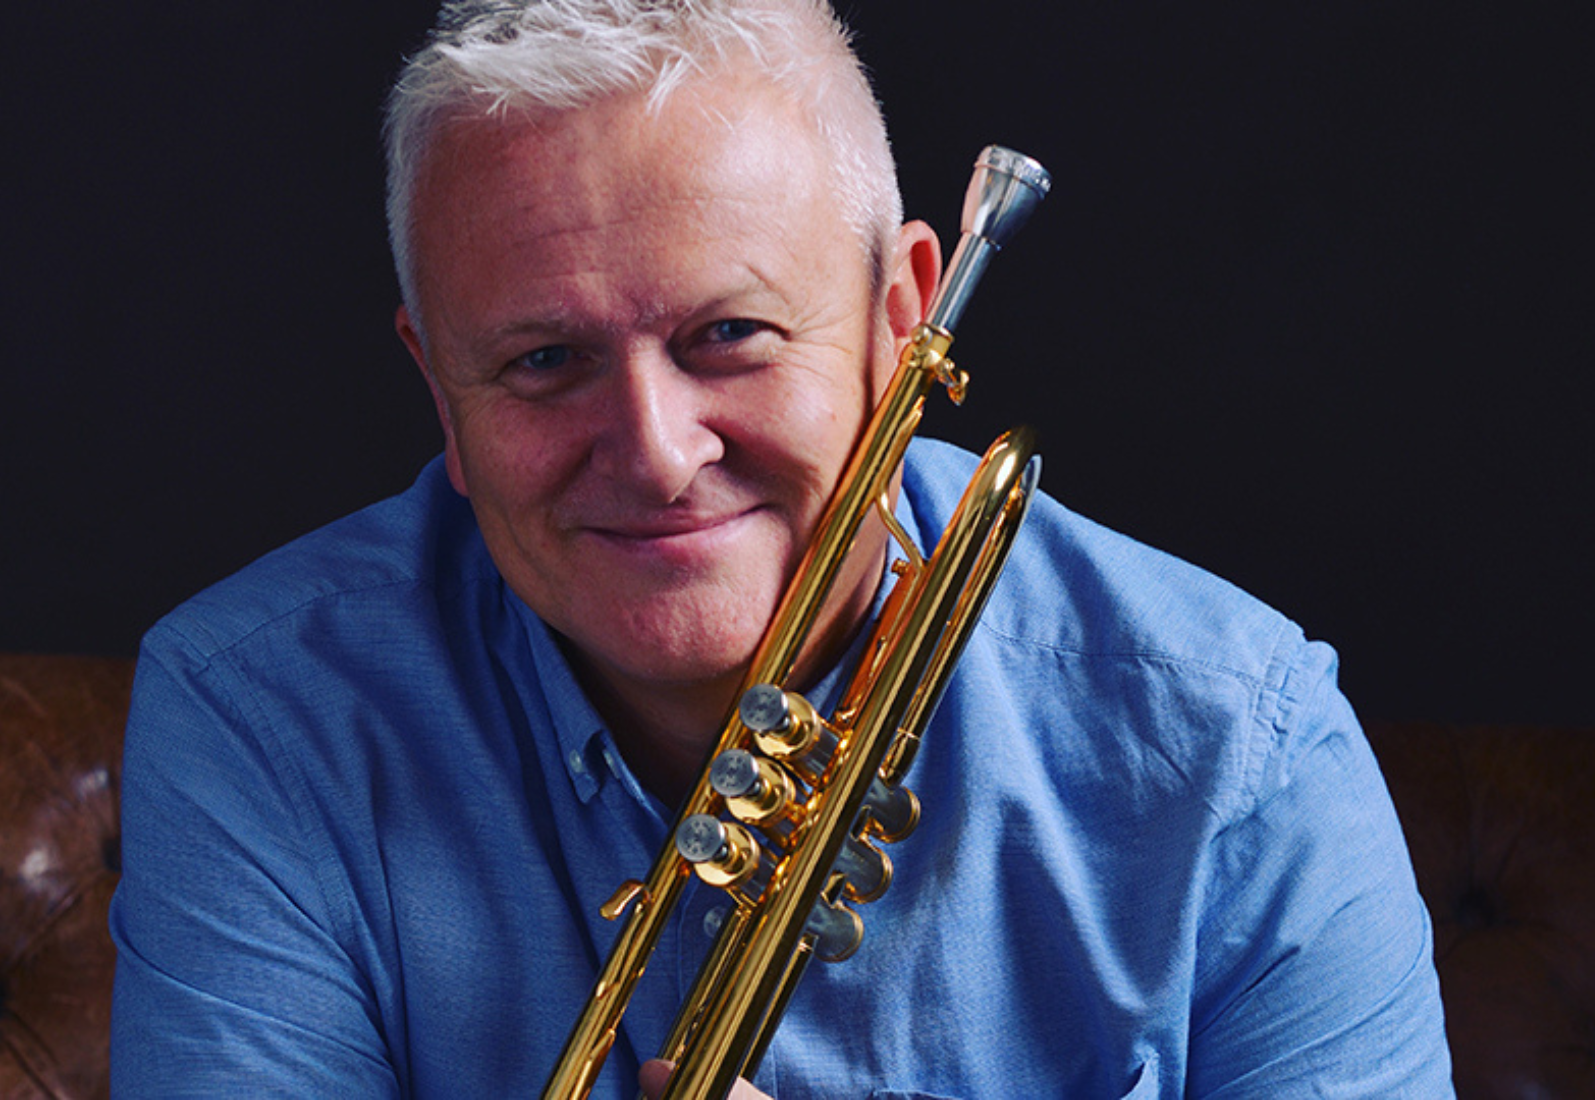 Mike Lovatt brings the live premiere of his Brass Pack to Harrogate